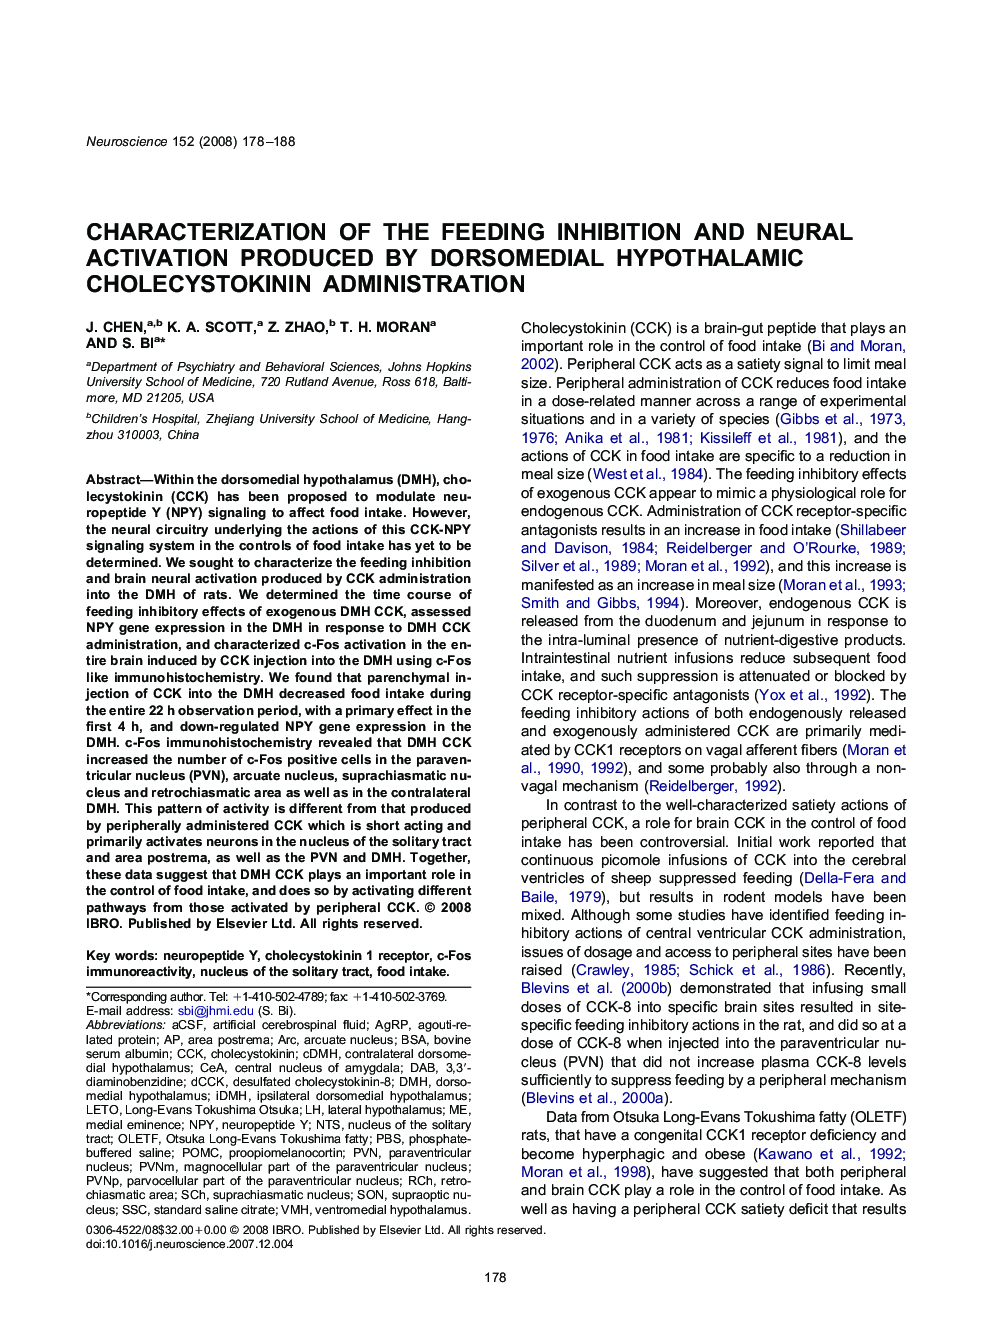 Characterization of the feeding inhibition and neural activation produced by dorsomedial hypothalamic cholecystokinin administration